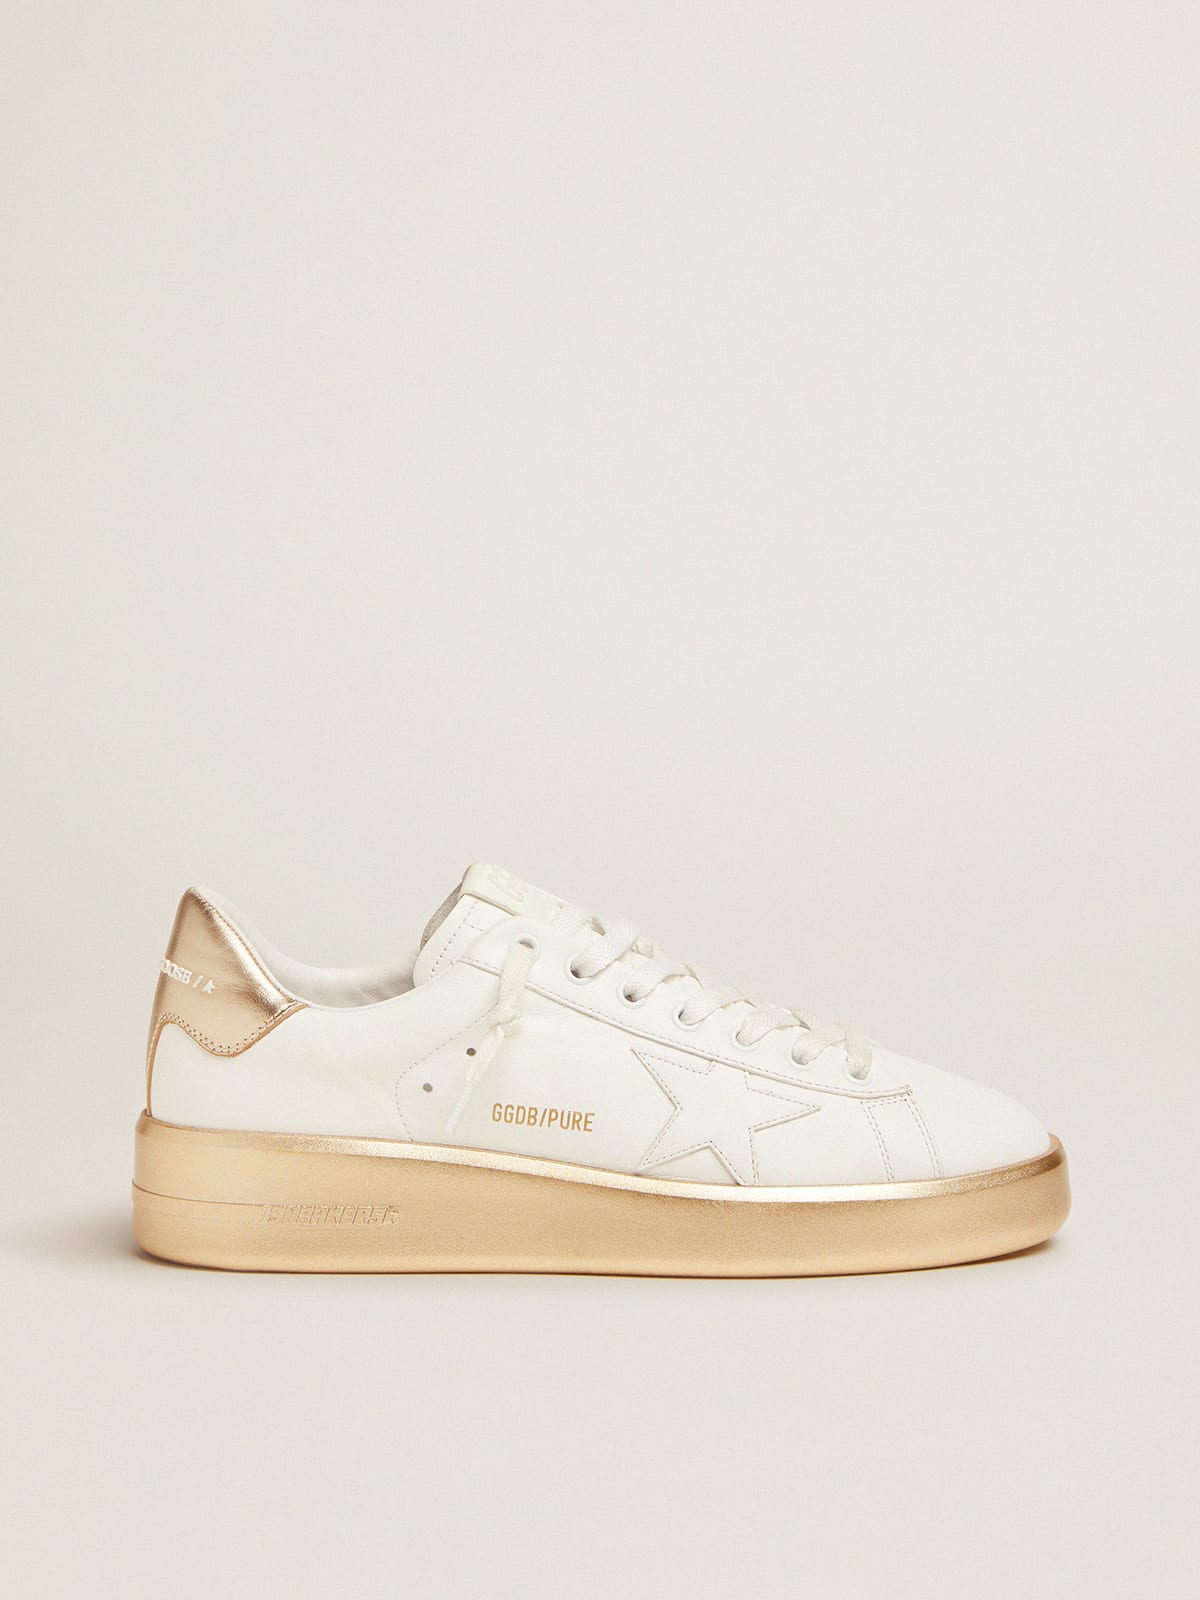 Purestar sneakers in leather with foxing and gold laminated leather heel tab  | Golden Goose